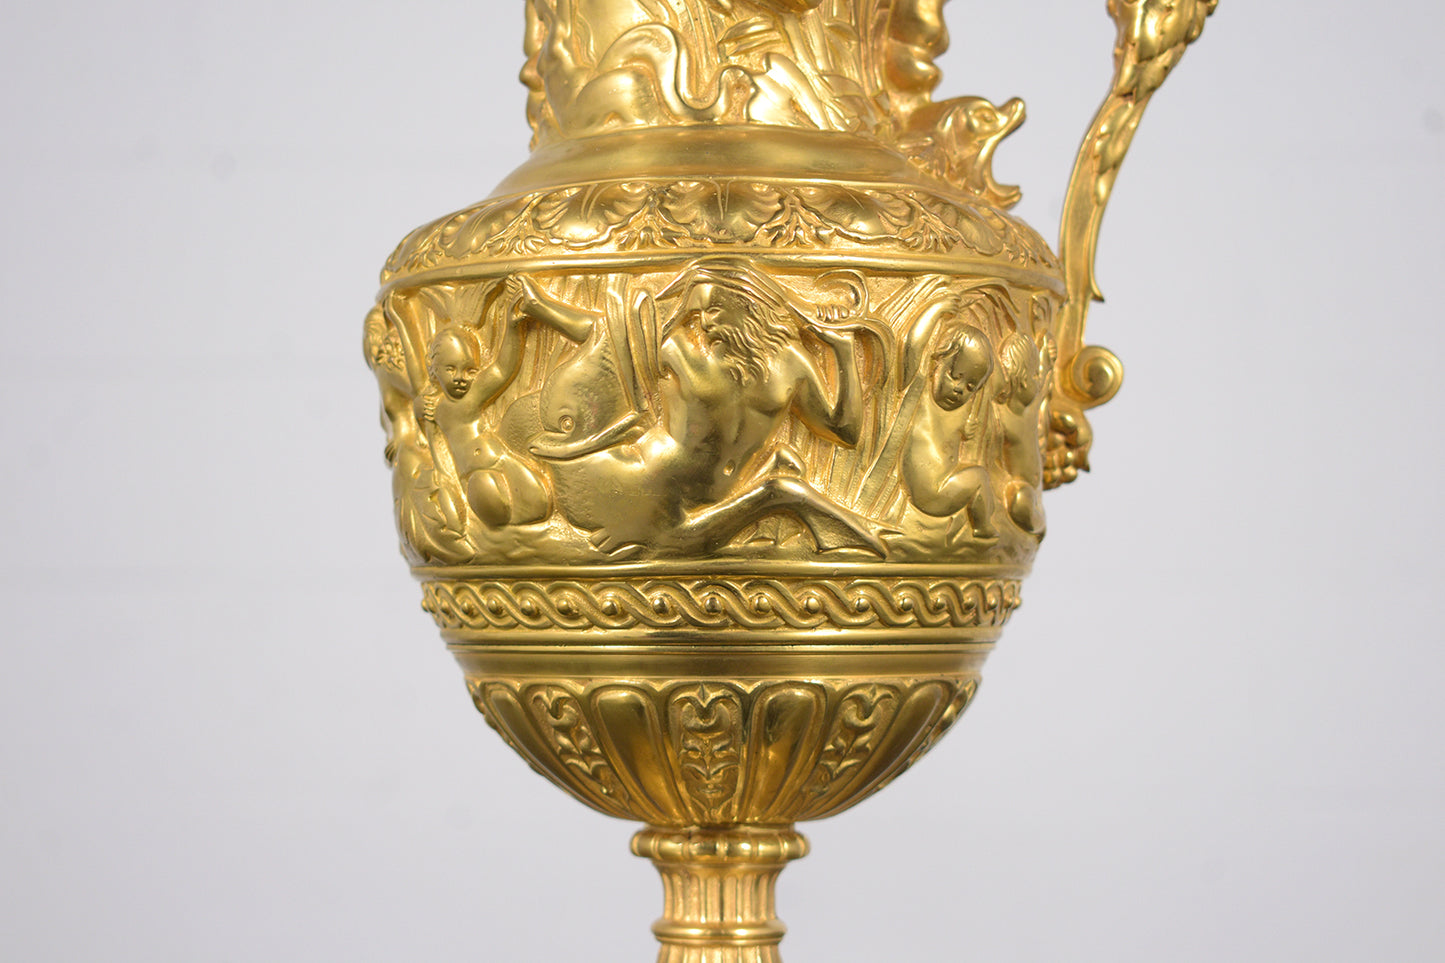 French Antique Brass Gold Plated Urn